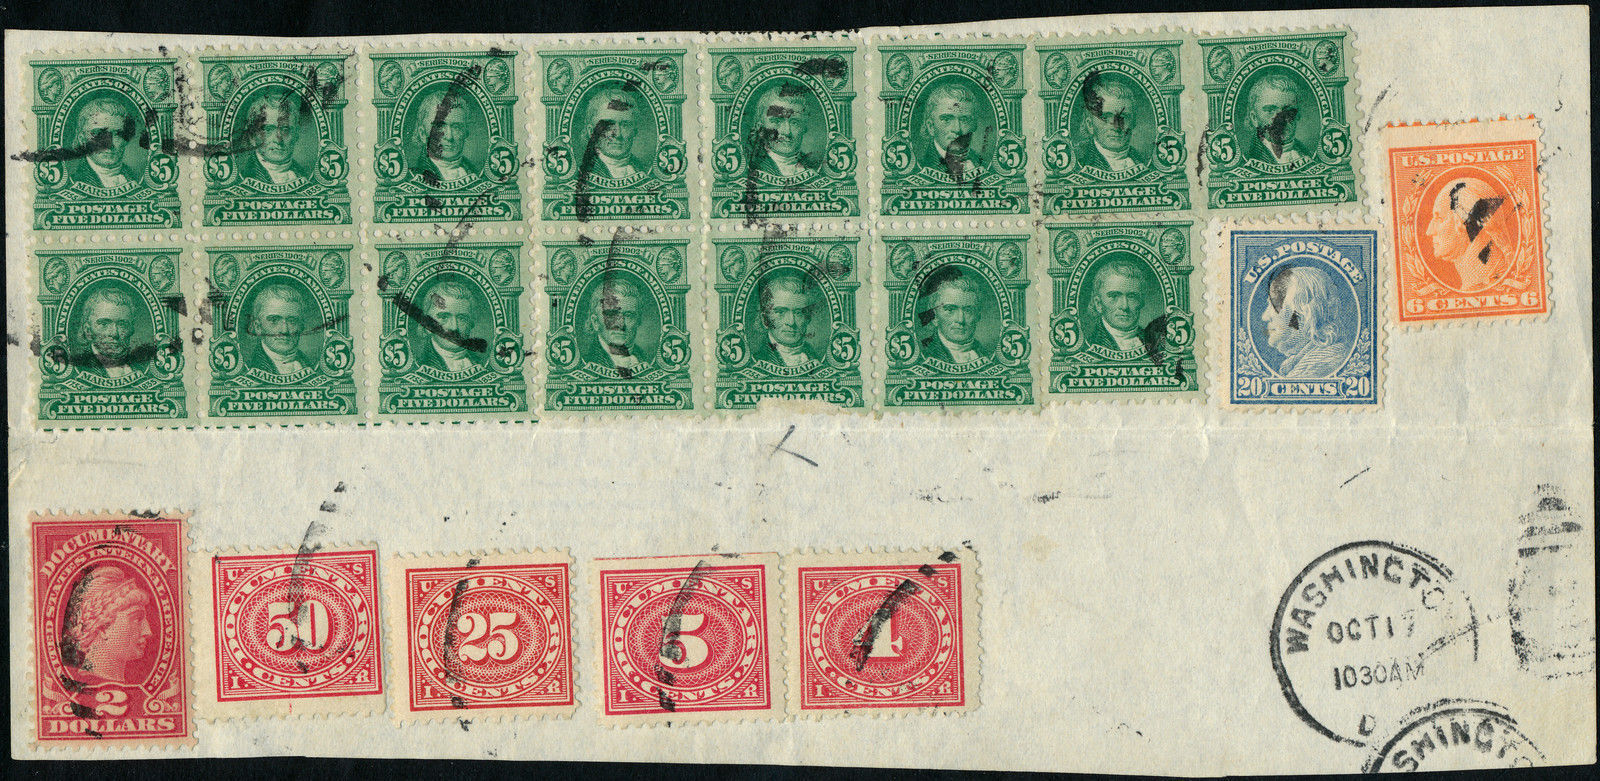 480 3 Singles 2 Blks 6 5 Usir Stamps F Vf Used On Piece Wl4306a Gpc17a Hipstamp